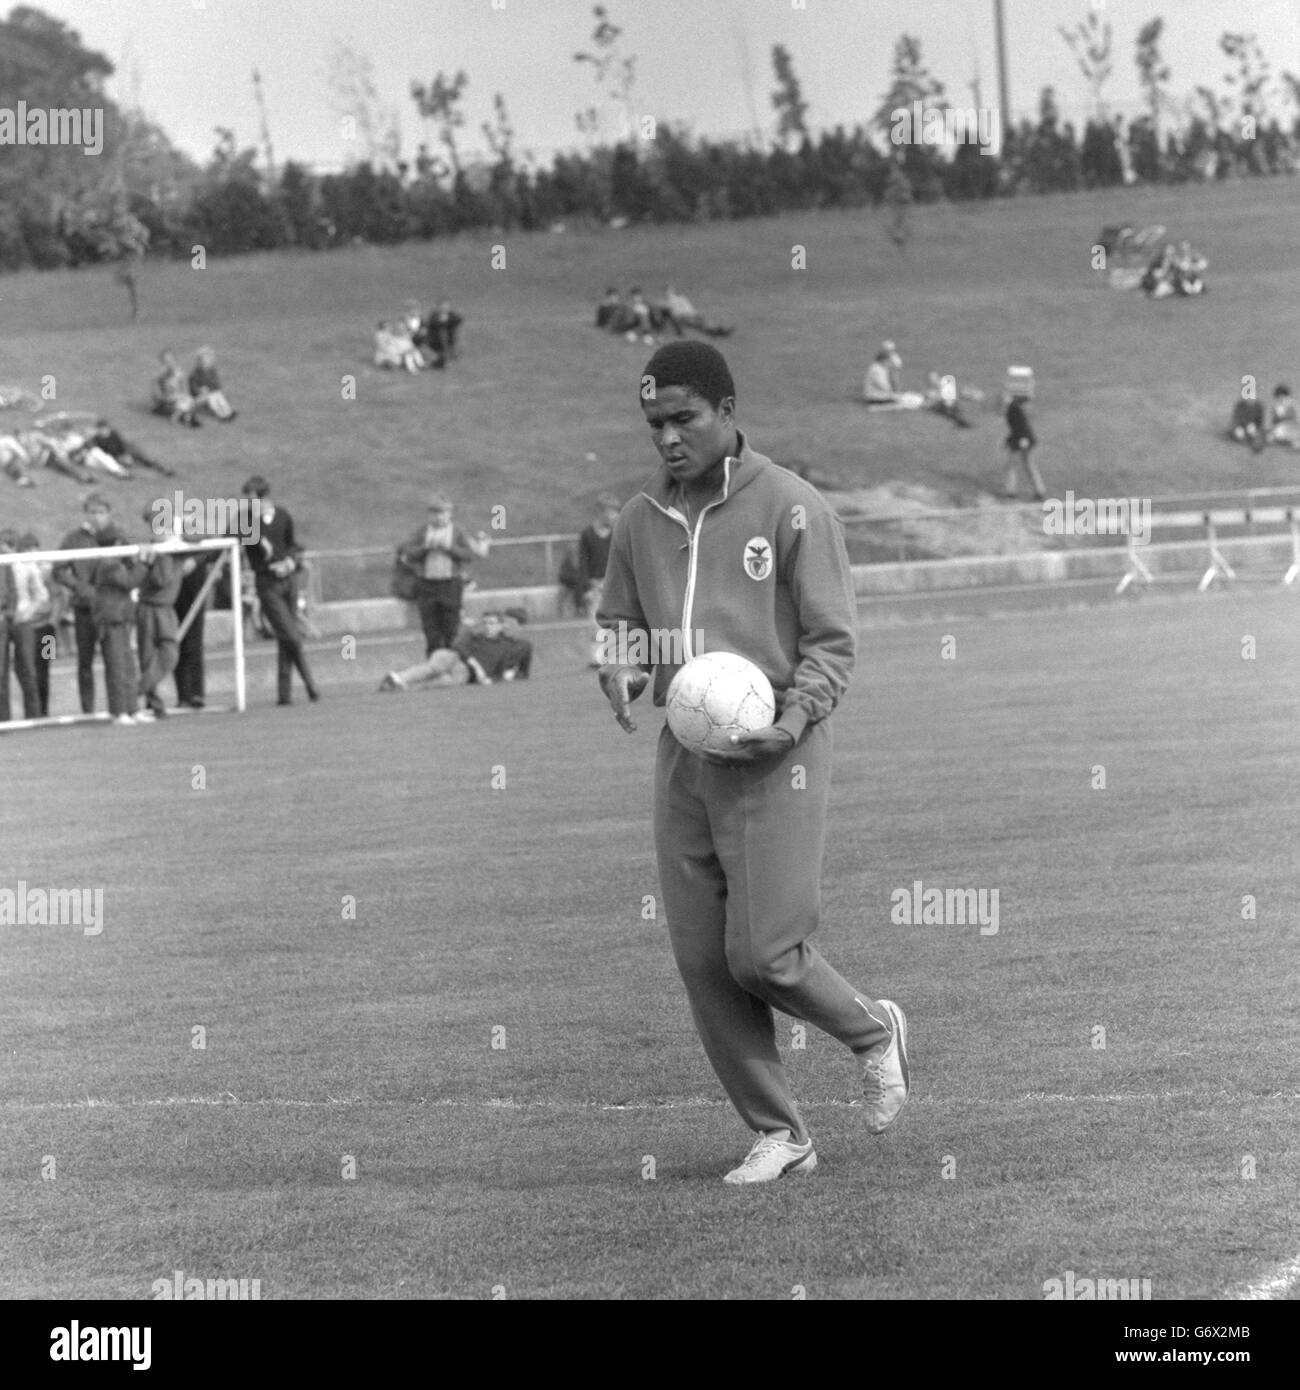 Benfica's Eusebio during a training session at Harlow Sports Centre ahead of their European Cup Final match against Manchester United at Wembley Stadium. Stock Photo